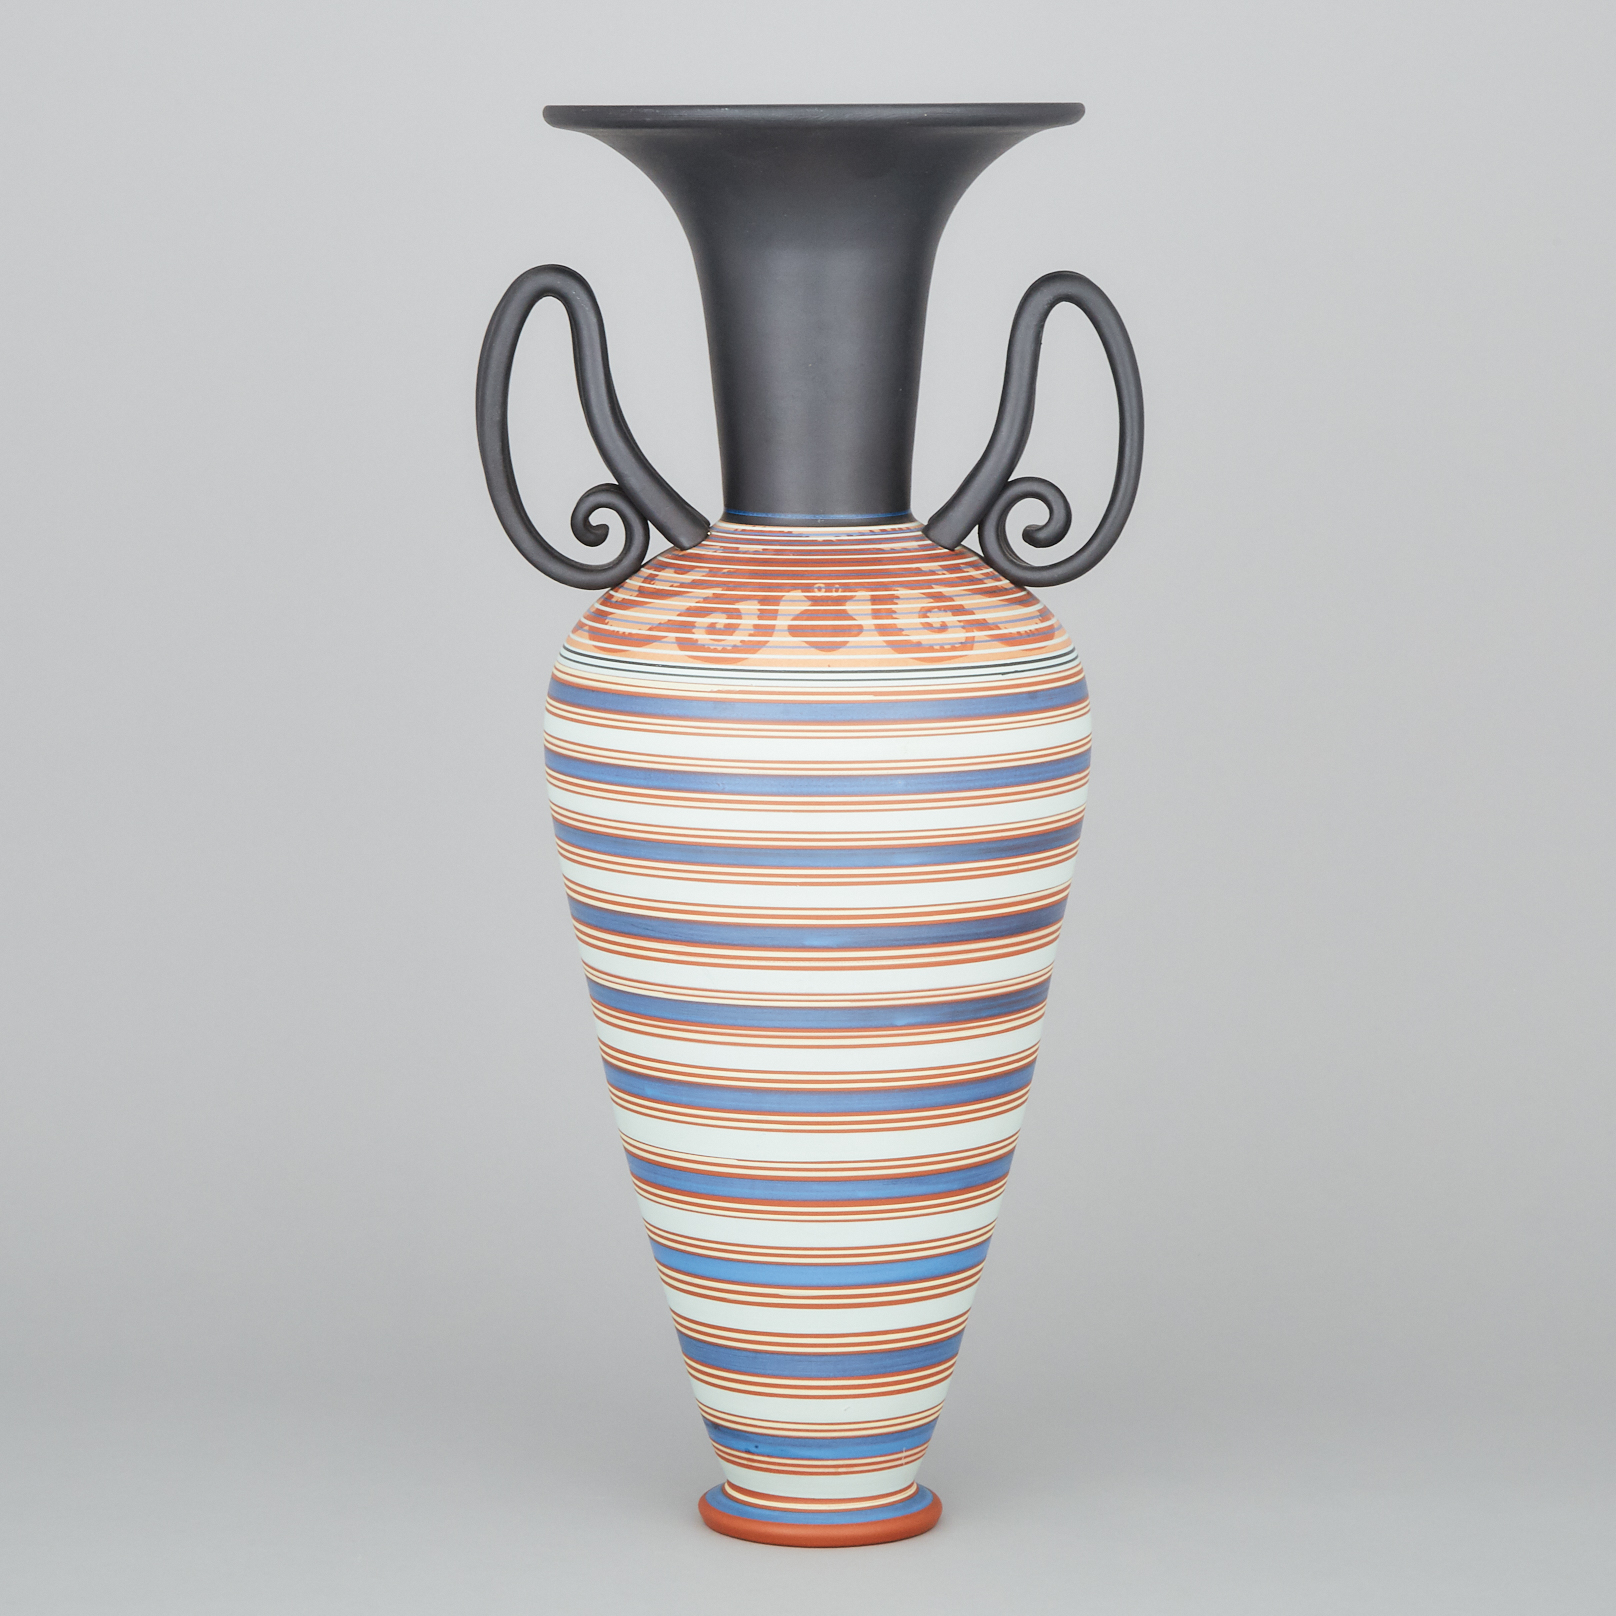 Greg Payce (Canadian, b.1956), Large Two-Handled Striped Vase, 1991